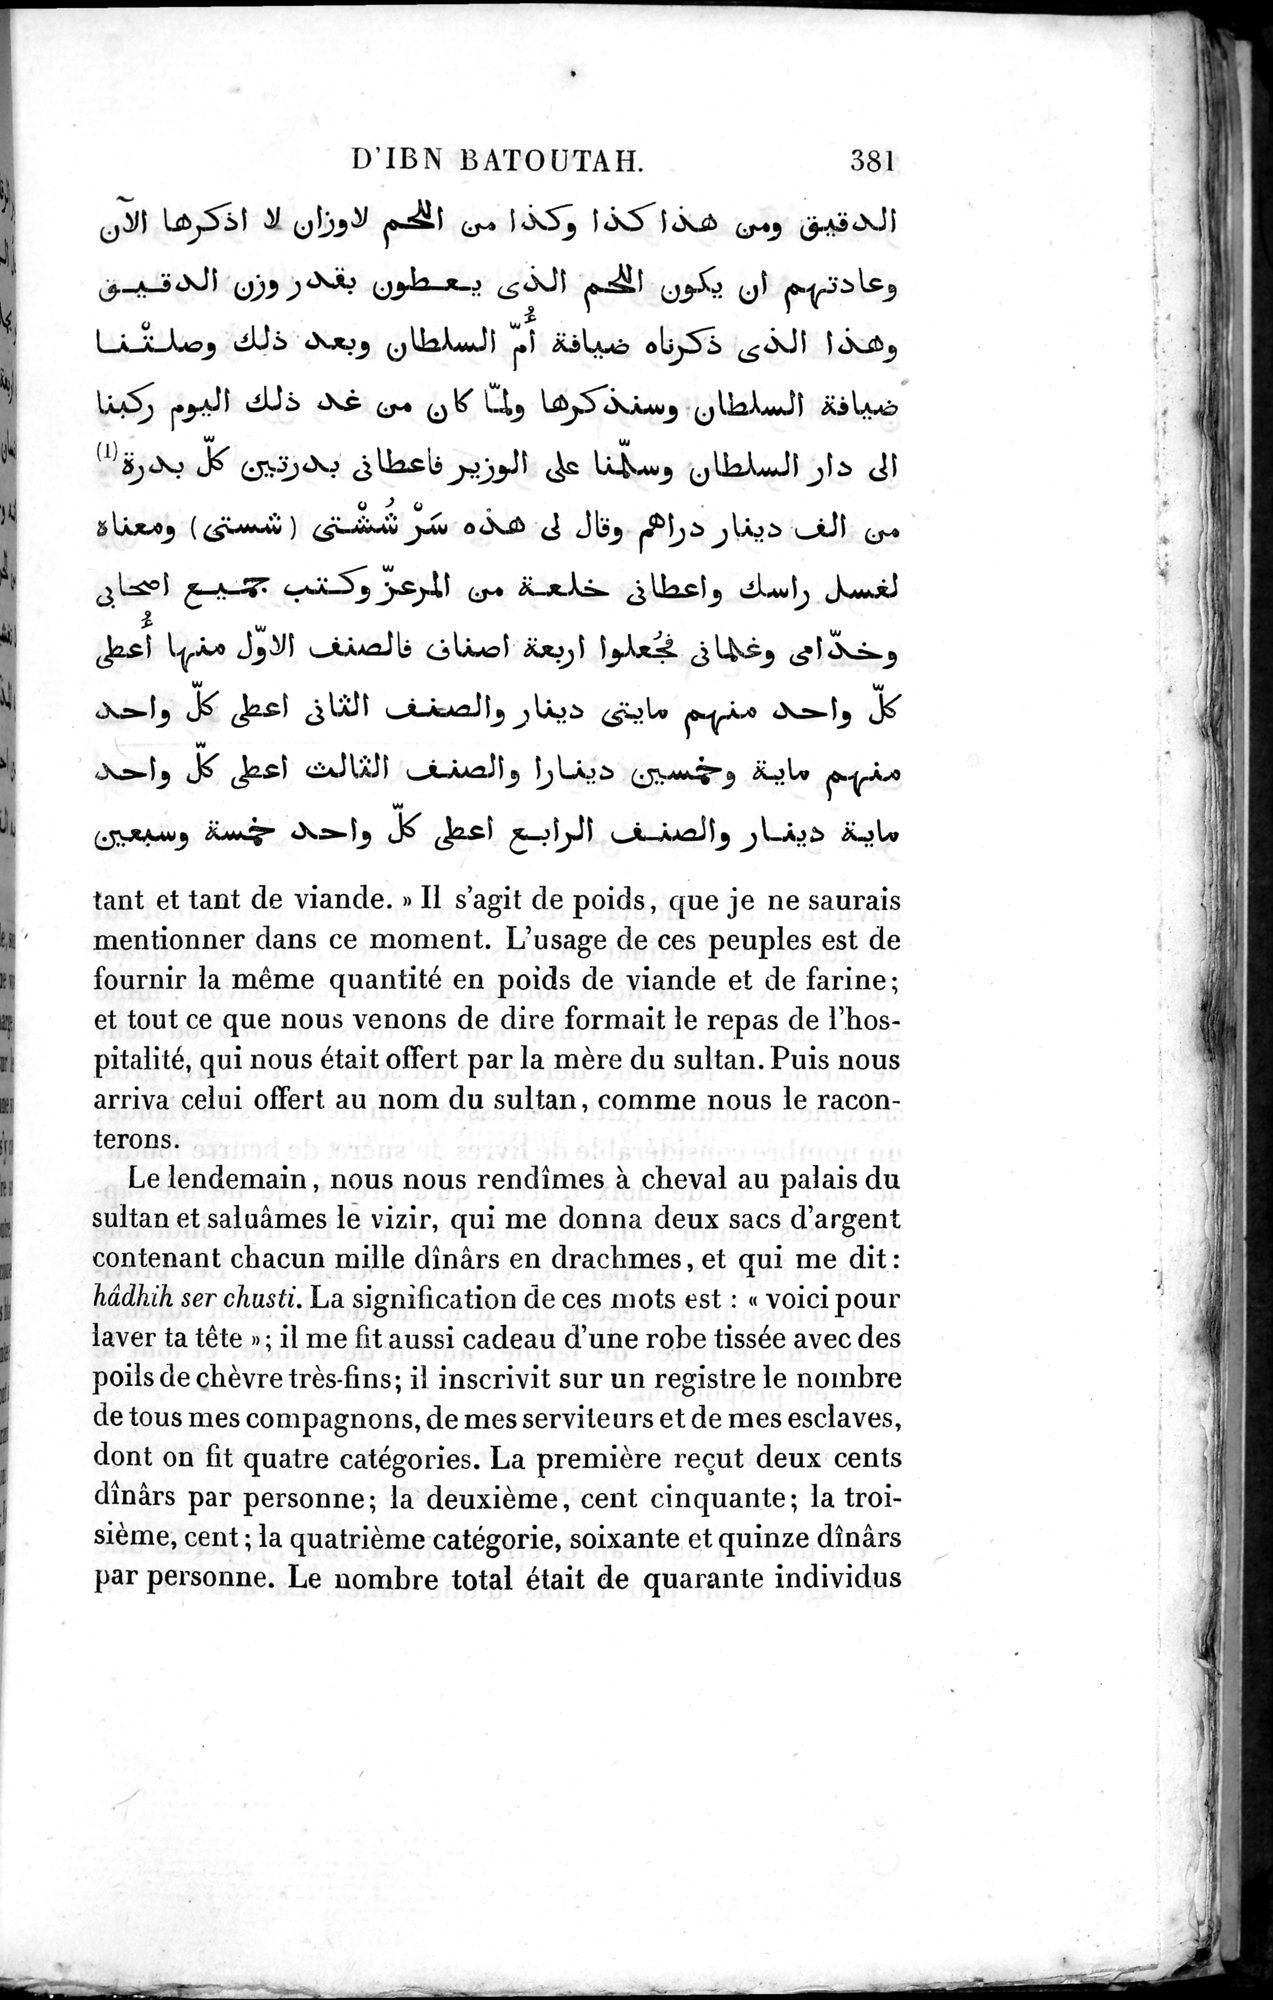 Voyages d'Ibn Batoutah : vol.3 / Page 421 (Grayscale High Resolution Image)